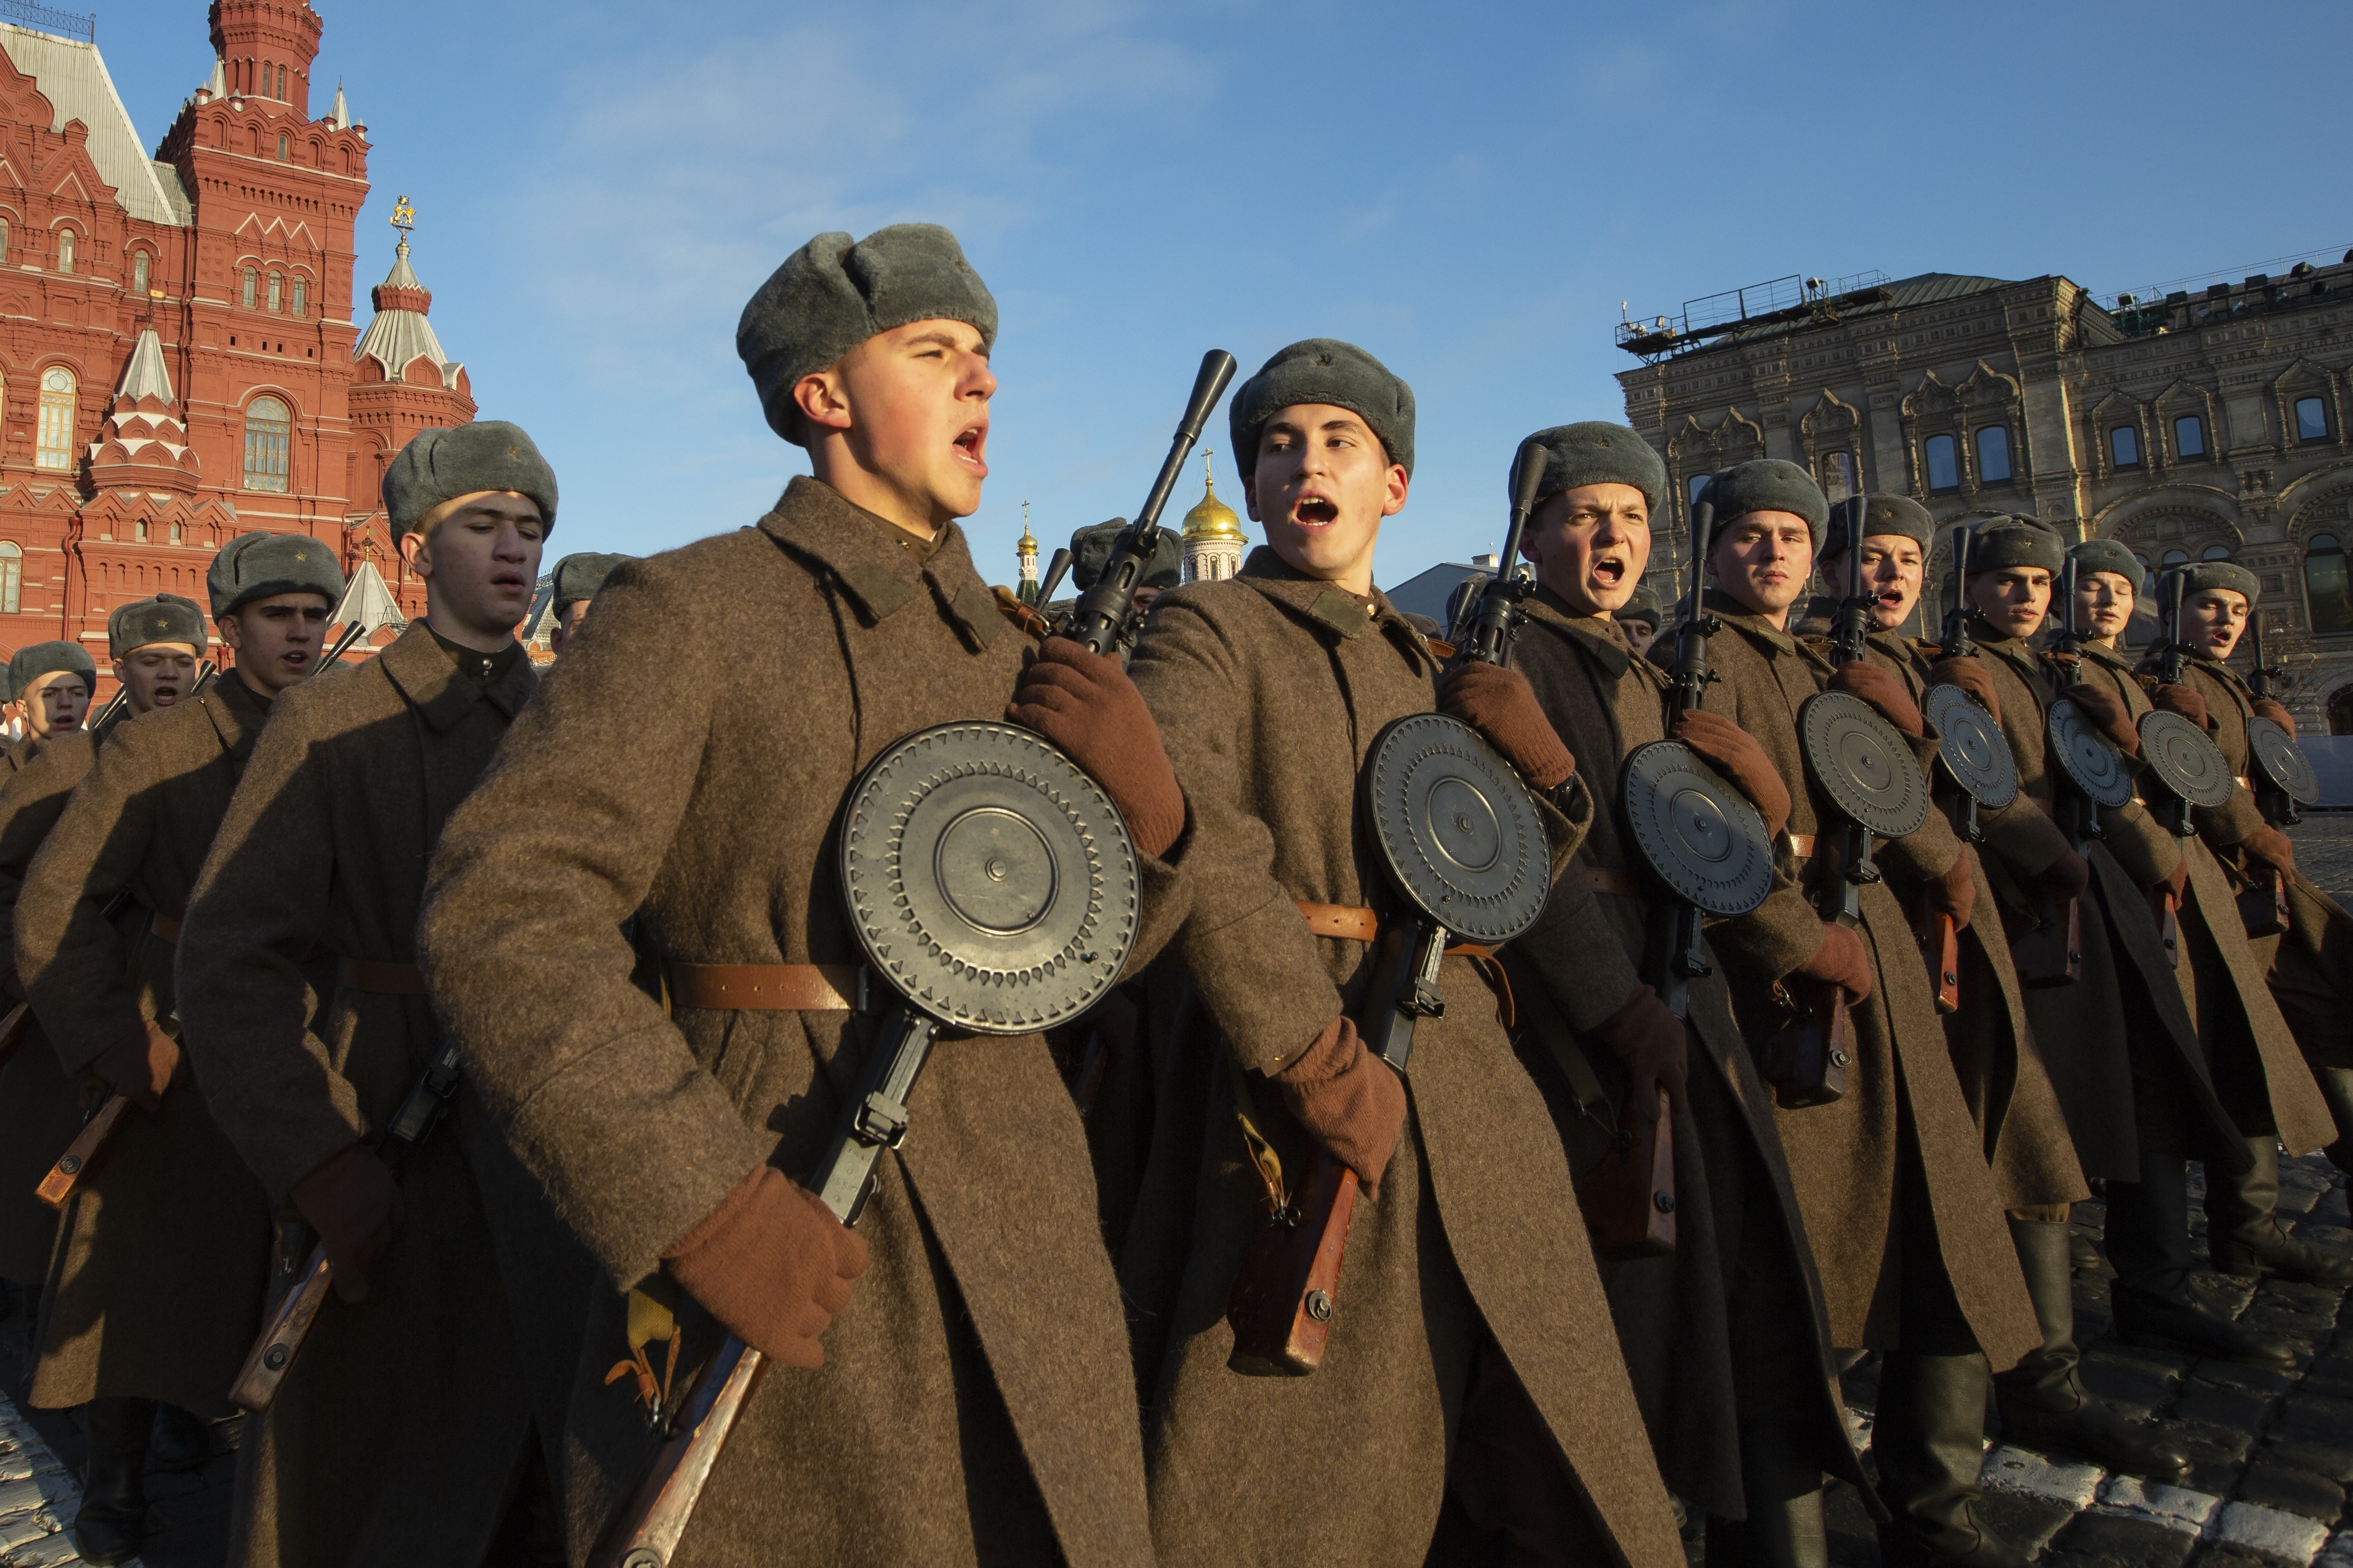 Russian soldiers dressed in Red Army World War II uniforms march during a rehearsal of the Nov. 7 parade in Red Square, in Moscow, Russia, Monday, Nov. 5, 2018. The parade marks the 77th anniversary of a World War II historic parade in Red Square and honored the participants in the Nov. 7, 1941 parade who headed directly to the front lines to defend Moscow from the Nazi forces. (AP Photo/Alexander Zemlianichenko)